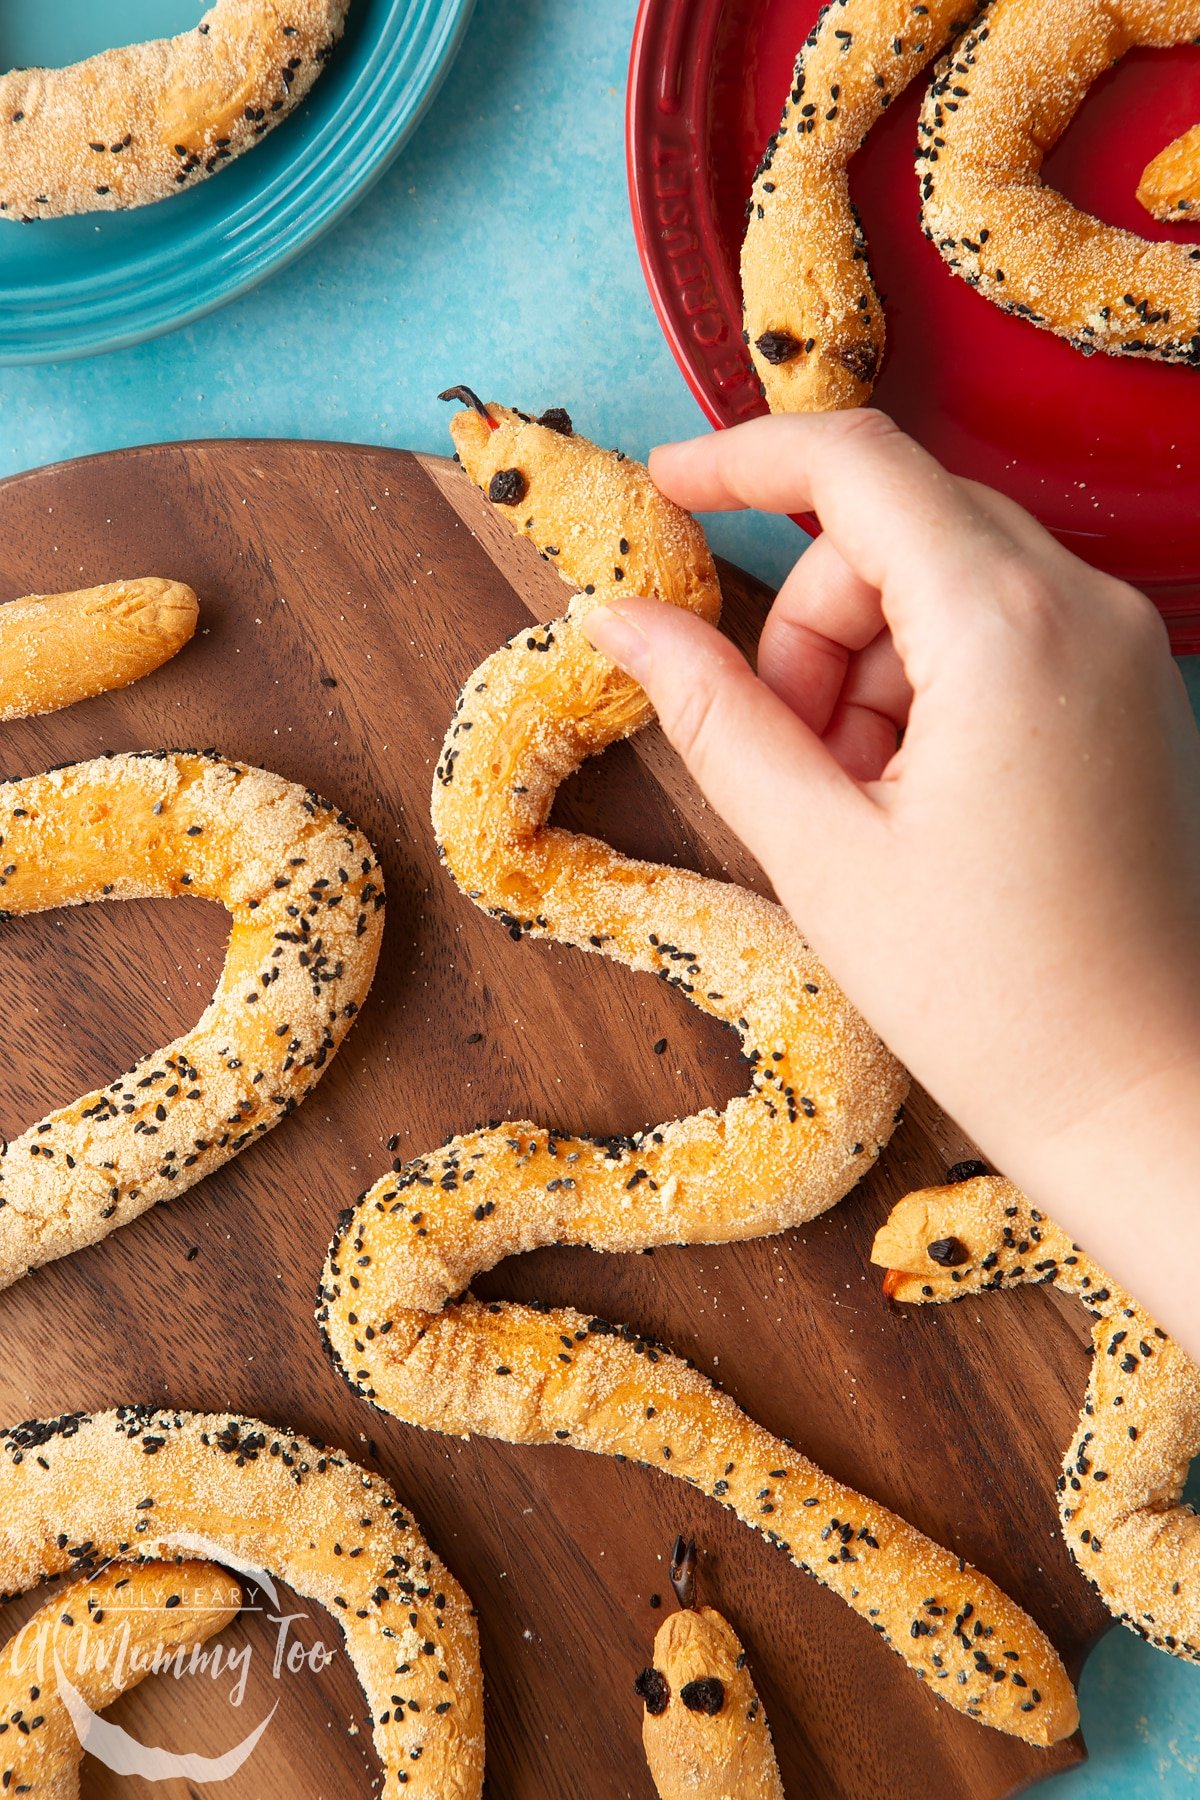 Bread snakes on a wooden board. A hand reaches for one, holding it near its head.